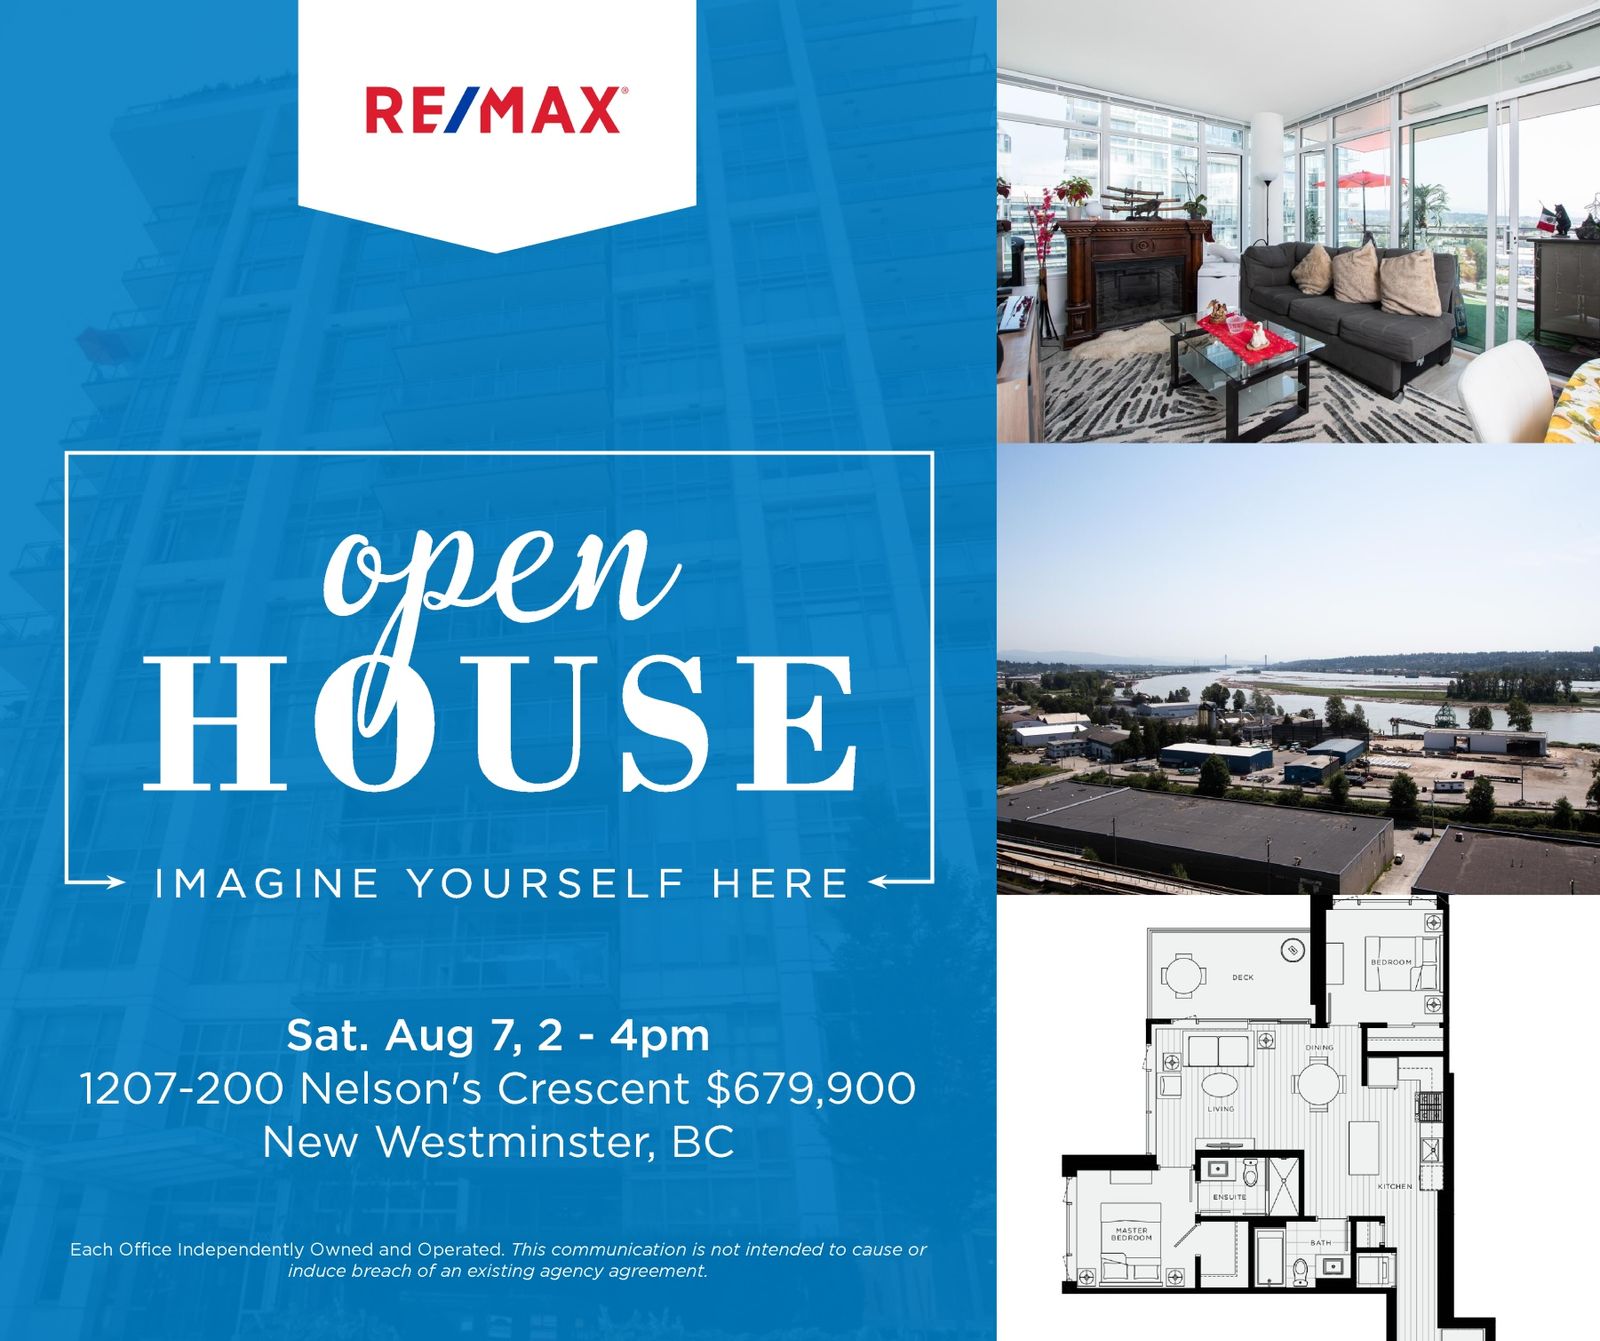 OPEN HOUSE: Aug 7, 2-4pm at 1207-200 Nelson's Crescent, New West